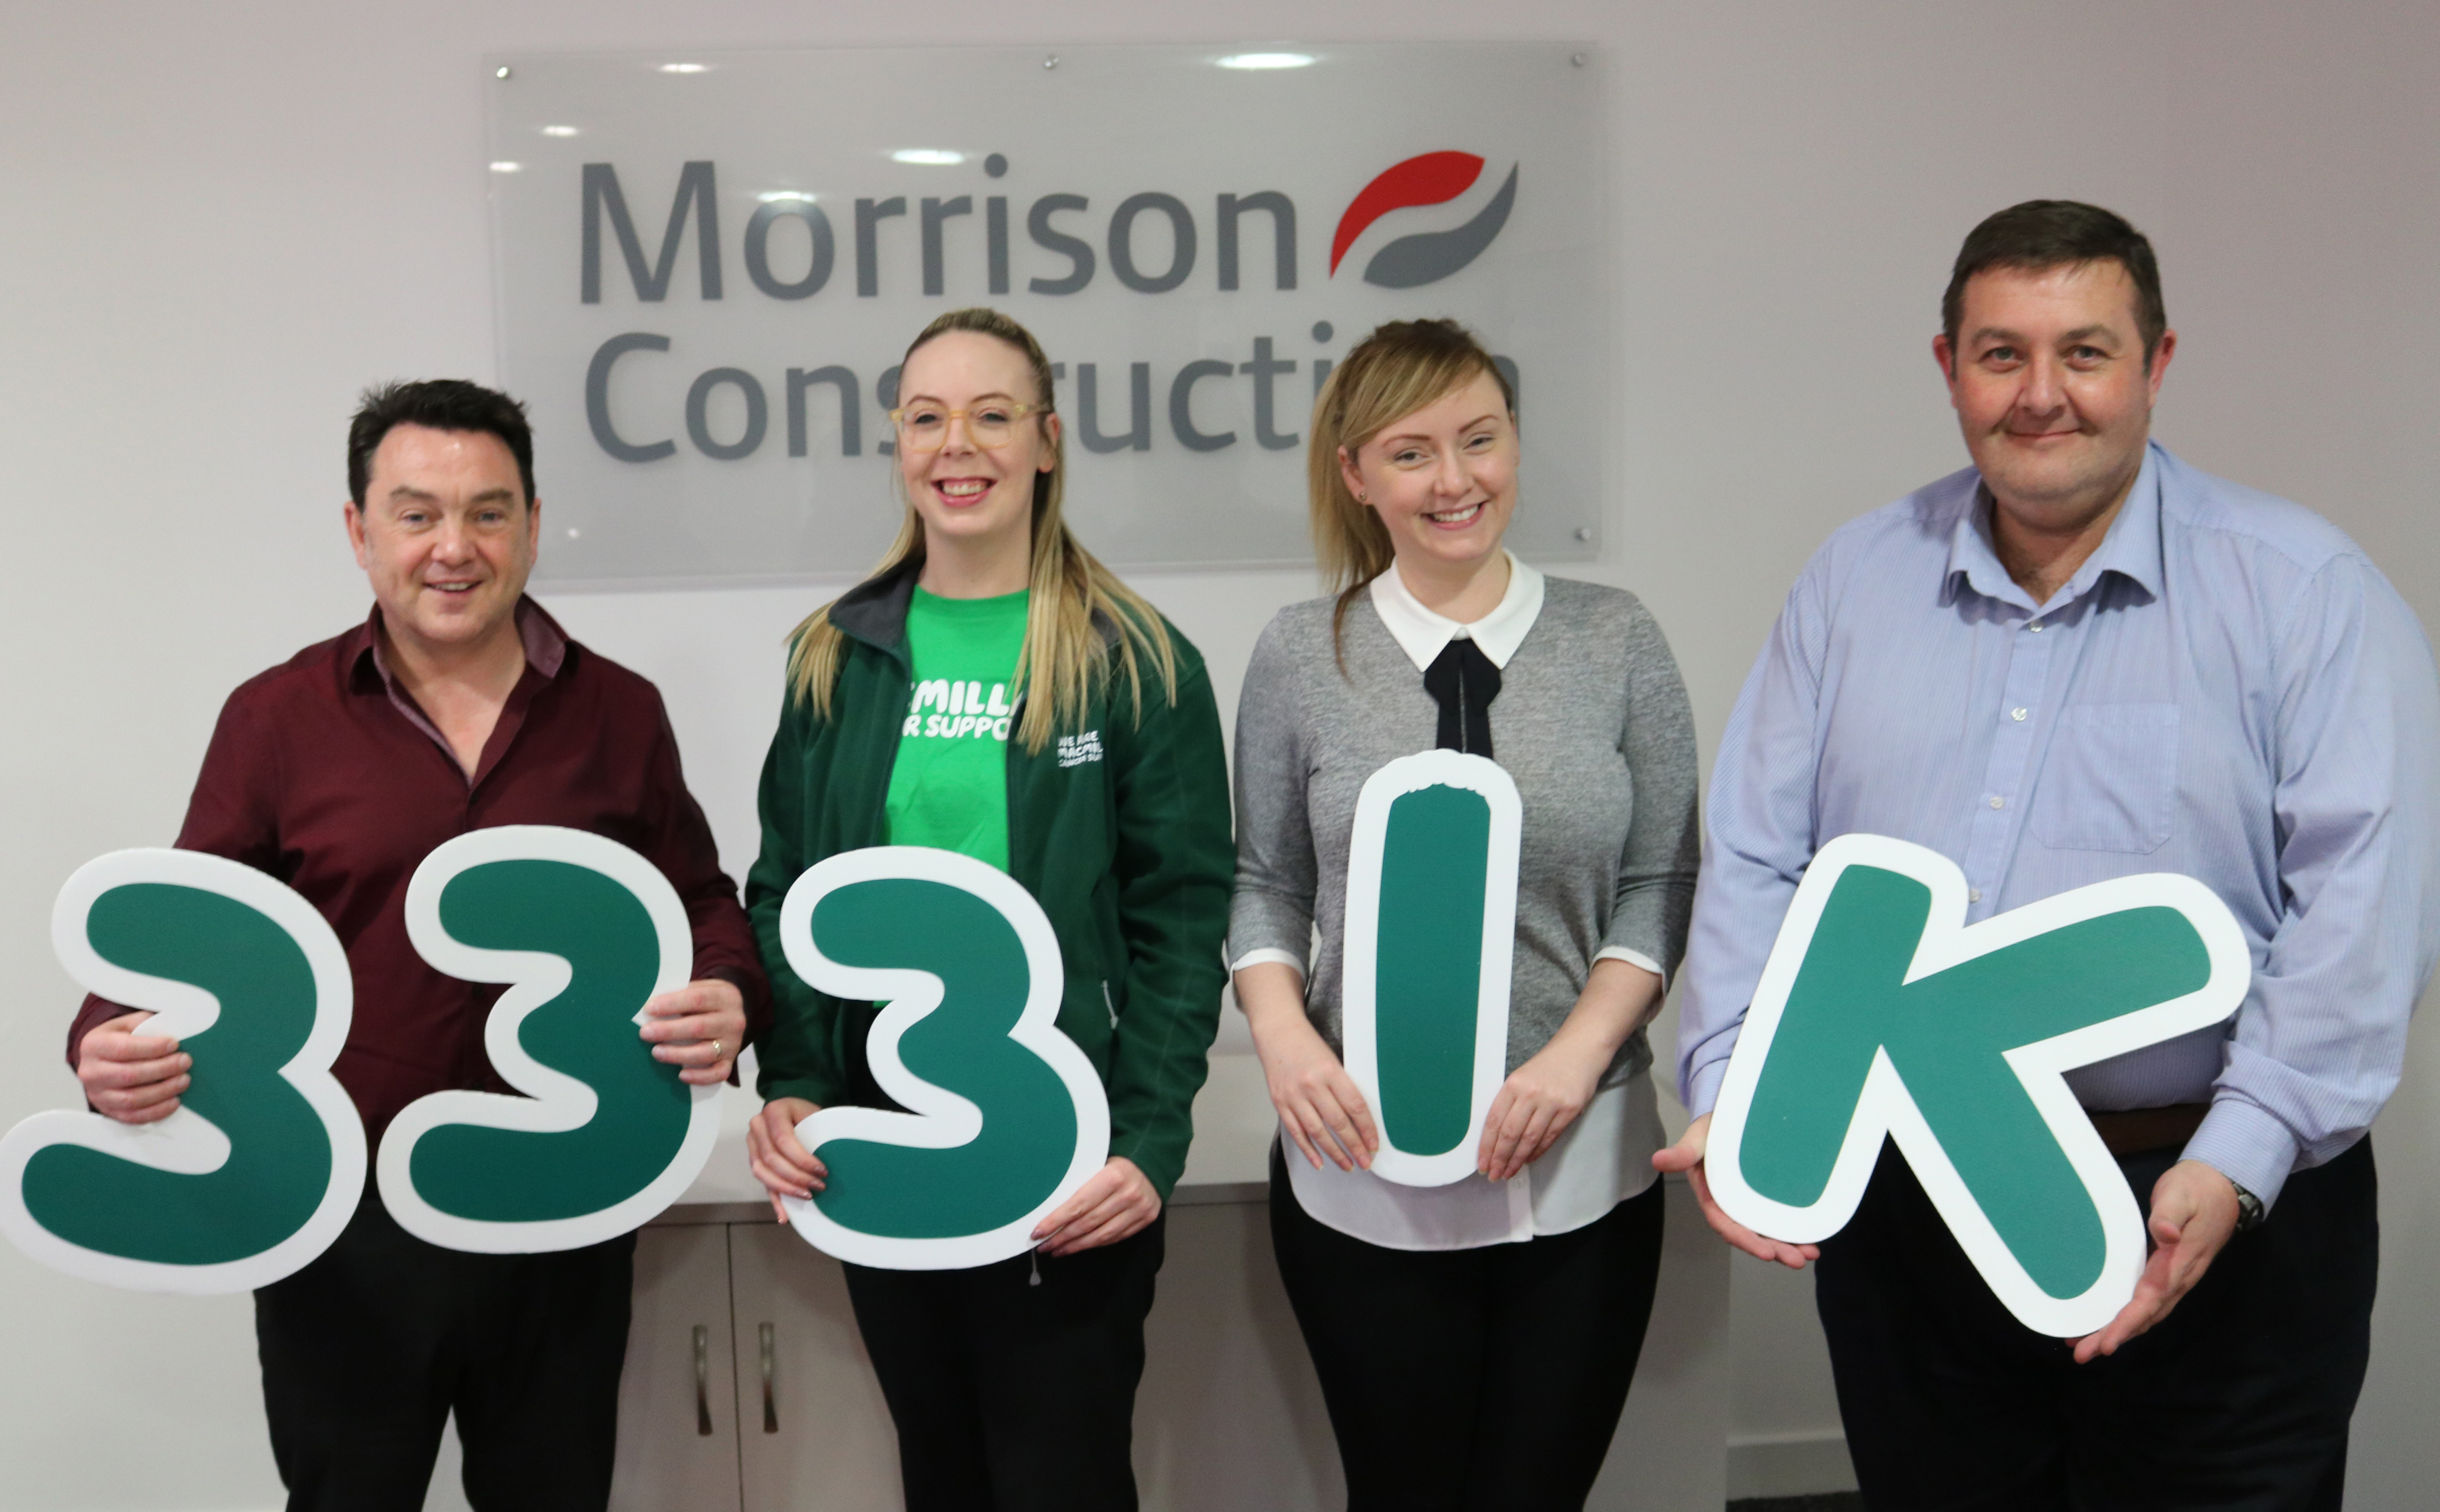 Morrison Construction celebrates £9,000 fundraising successes with charity partners